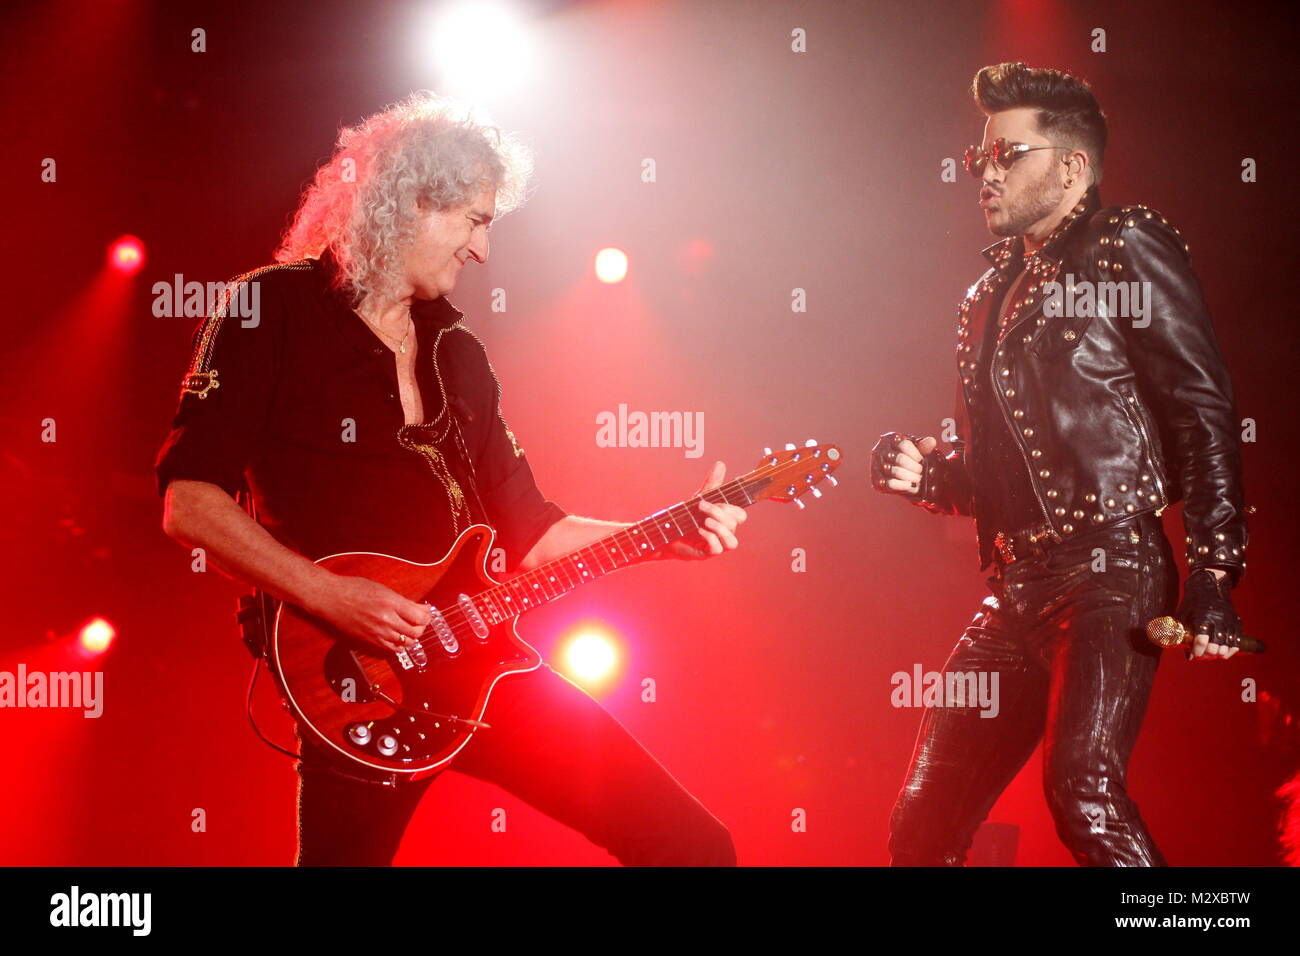 Frankfurt, Germany. 7th Feb, 2015. Queen + Adam Lambert, collaboration between the active members of the British rock band Queen (Brian May and Roger Taylor) and American vocalist Adam Lambert. Concert at Festhalle Frankfurt, Germany. Here: Brian May, Adam Lambert. Credit: Christian Lademann Stock Photo